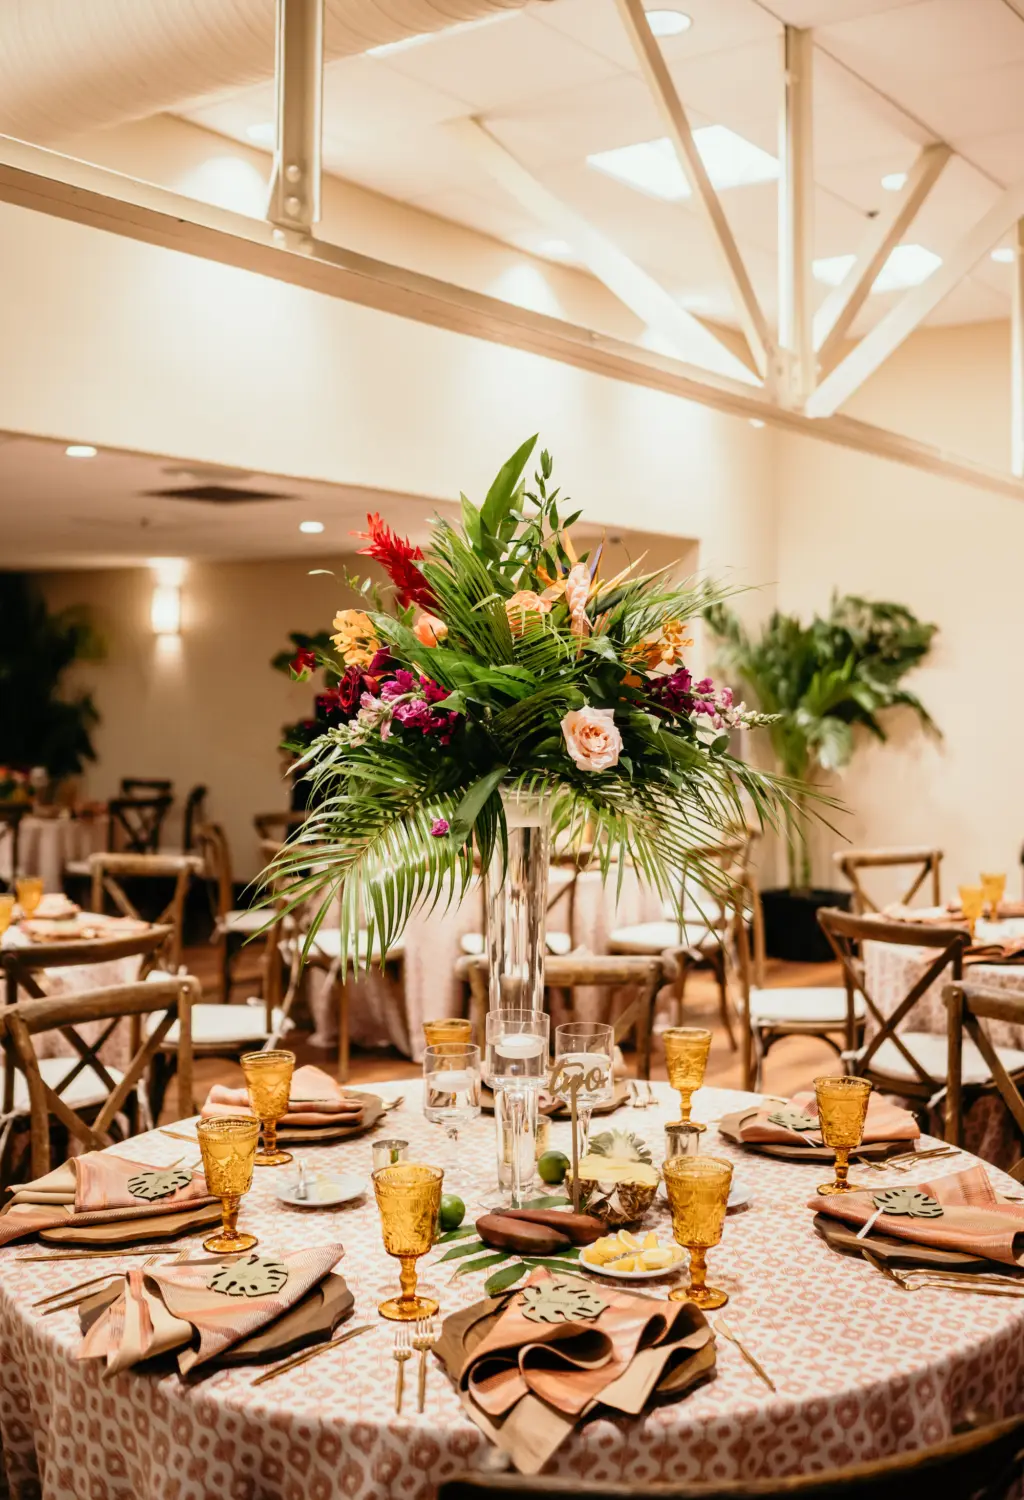 Tropical Wedding Reception Centerpiece Decor Inspiration | Tall Floral Arrangement with Palm Leaf, Pink and Burgundy Roses, Birds of Paradise | St Pete Florist Save The Date Florida | Wood Charger Plates and Vintage Glassware from Kate Ryan Event Rentals